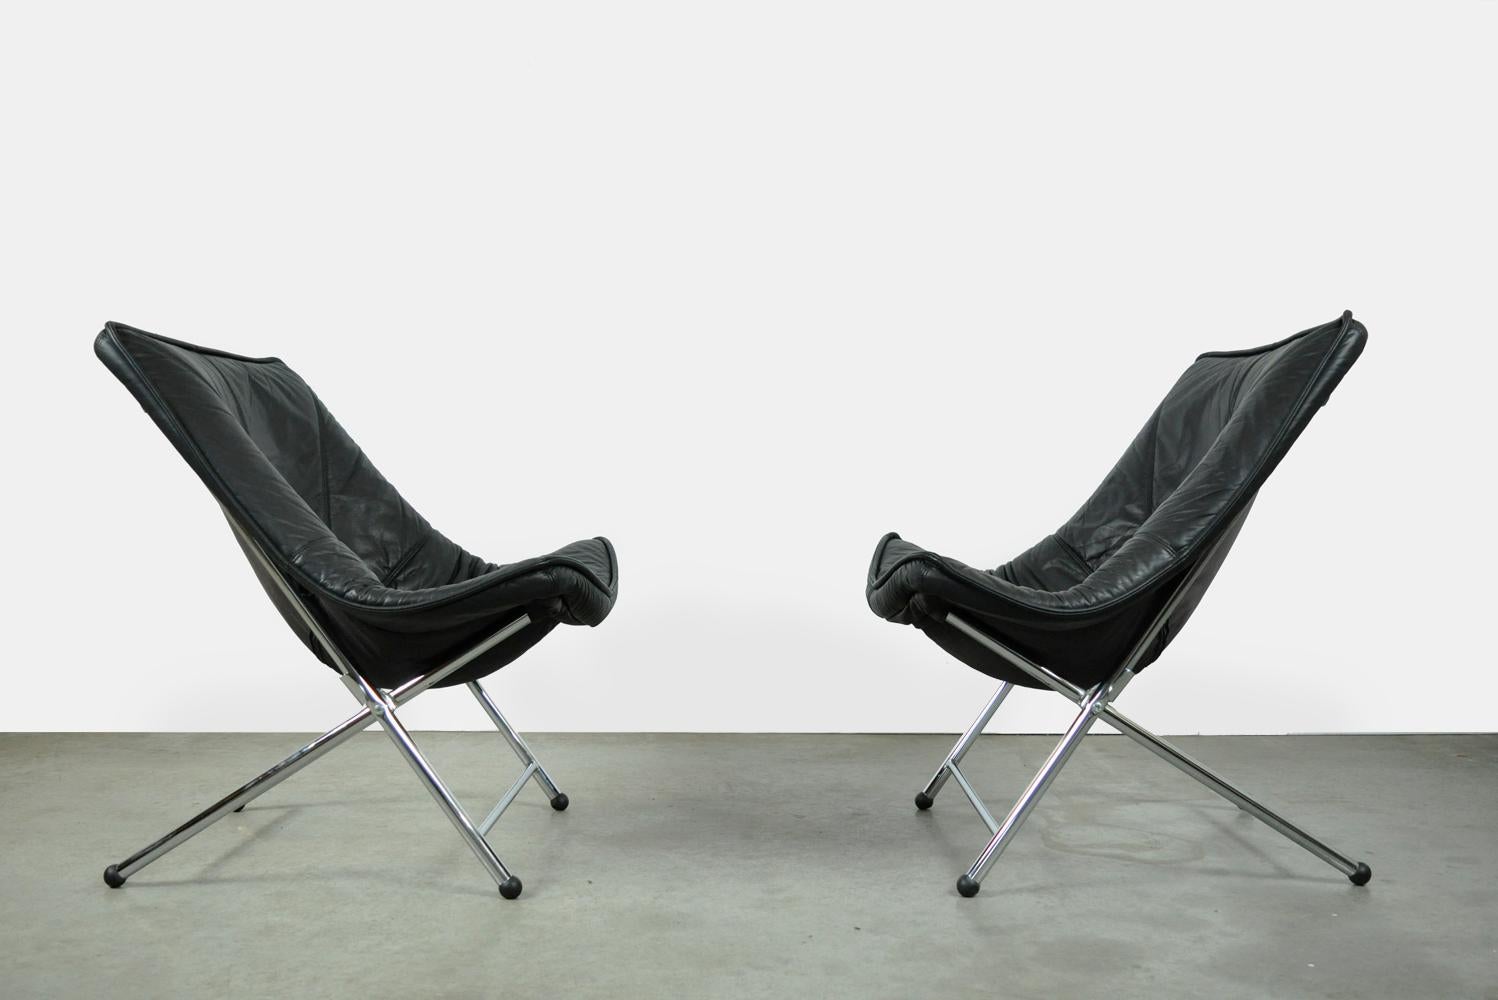 Beautiful designer armchairs designed by Teun van Zanten and produced by the Italian Molinari in the 1970s. The design classic from the Netherlands has a beautiful supple and thick quality black leather upholstery. The supple leather seat with a